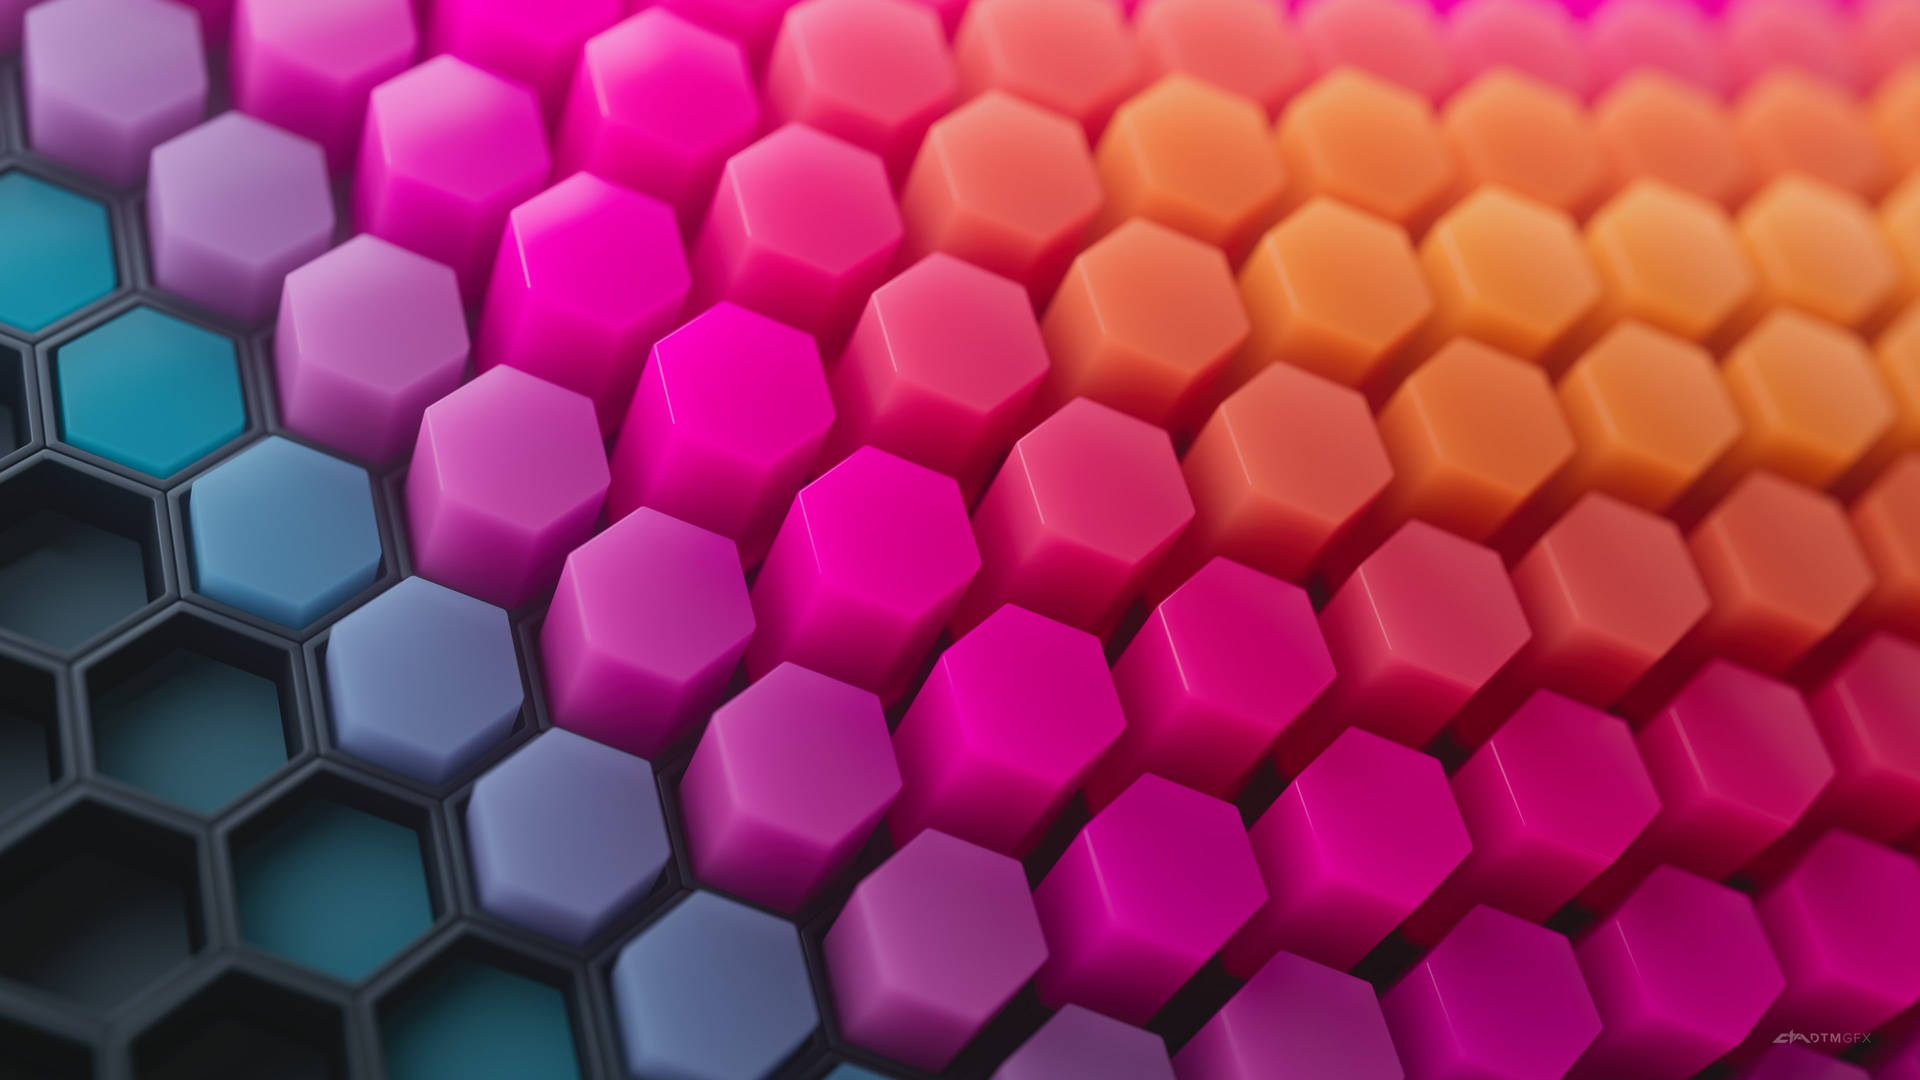 Honeycomb Graphic For Colorful Background Wallpaper